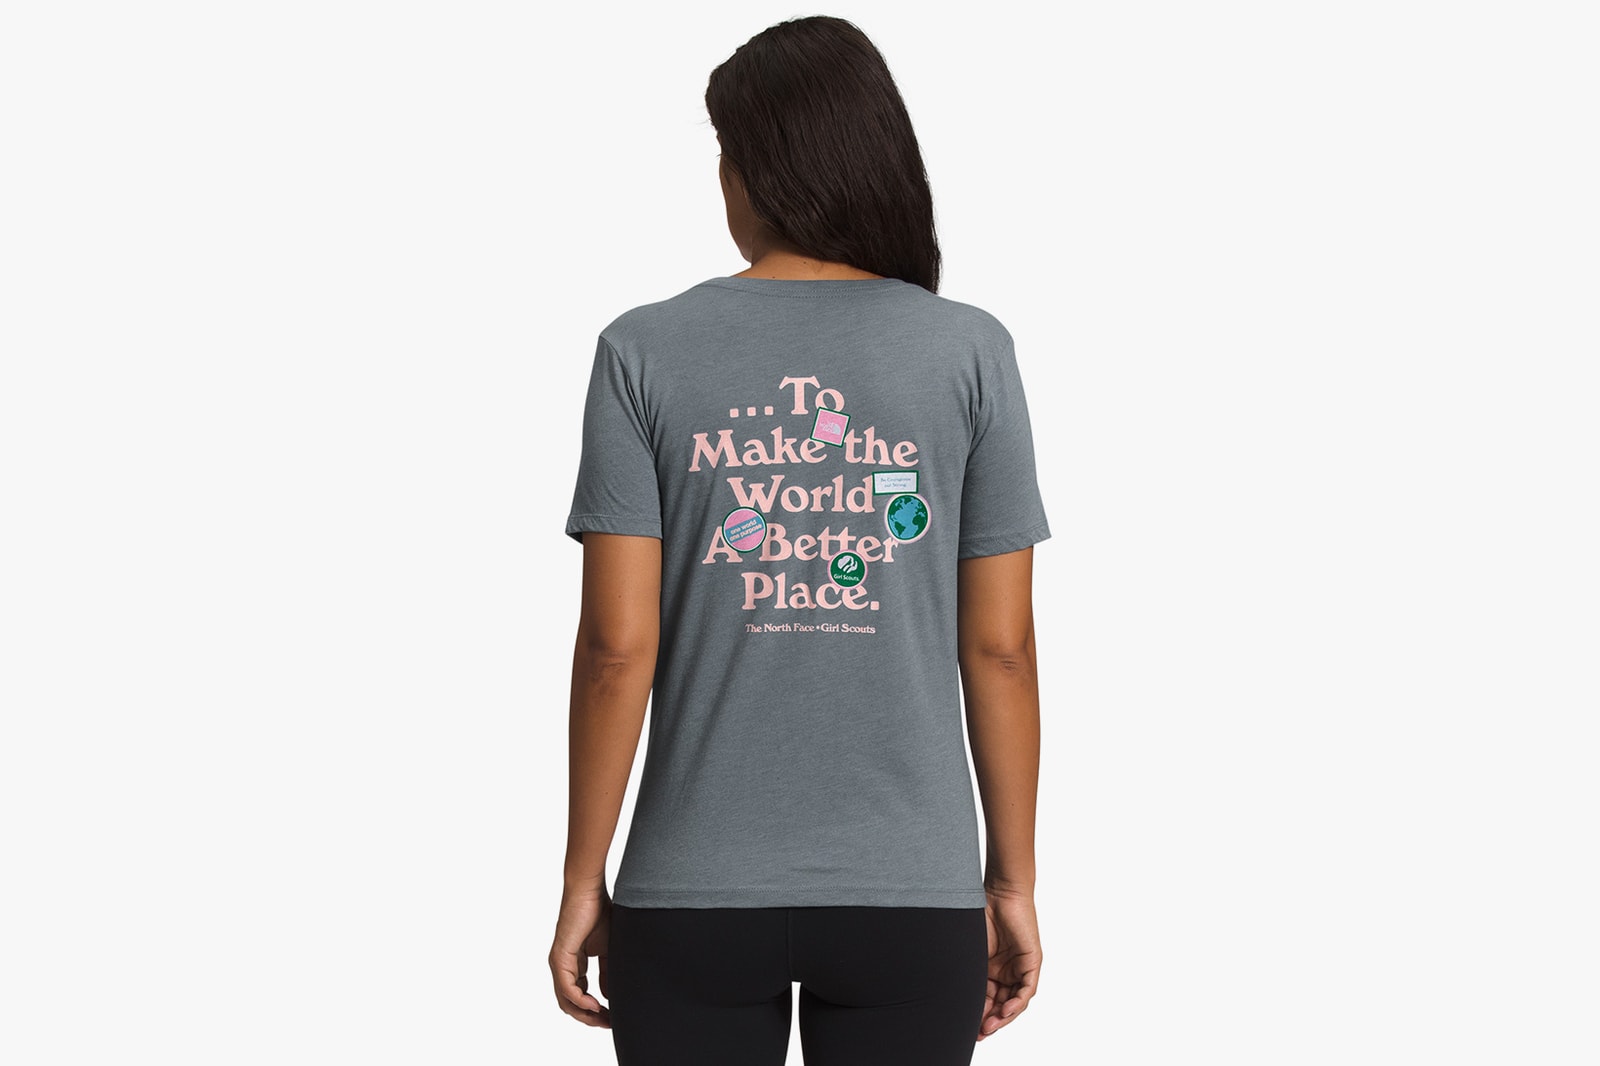 the north face girl scouts t-shirt collaboration maureen beck climber covid19 support release